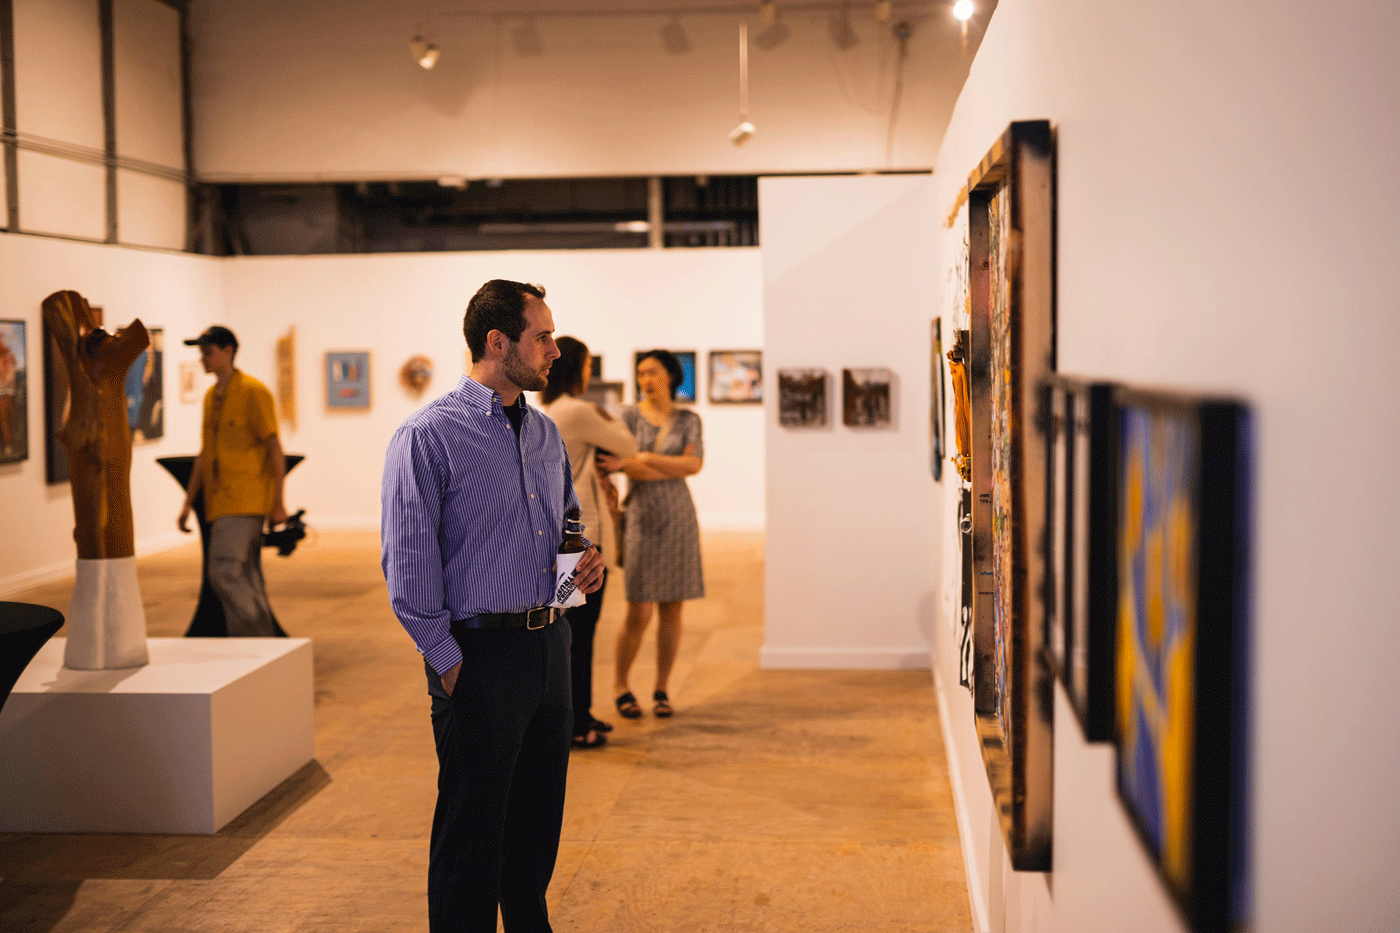 A person looks at artwork hanging on a gallery wall